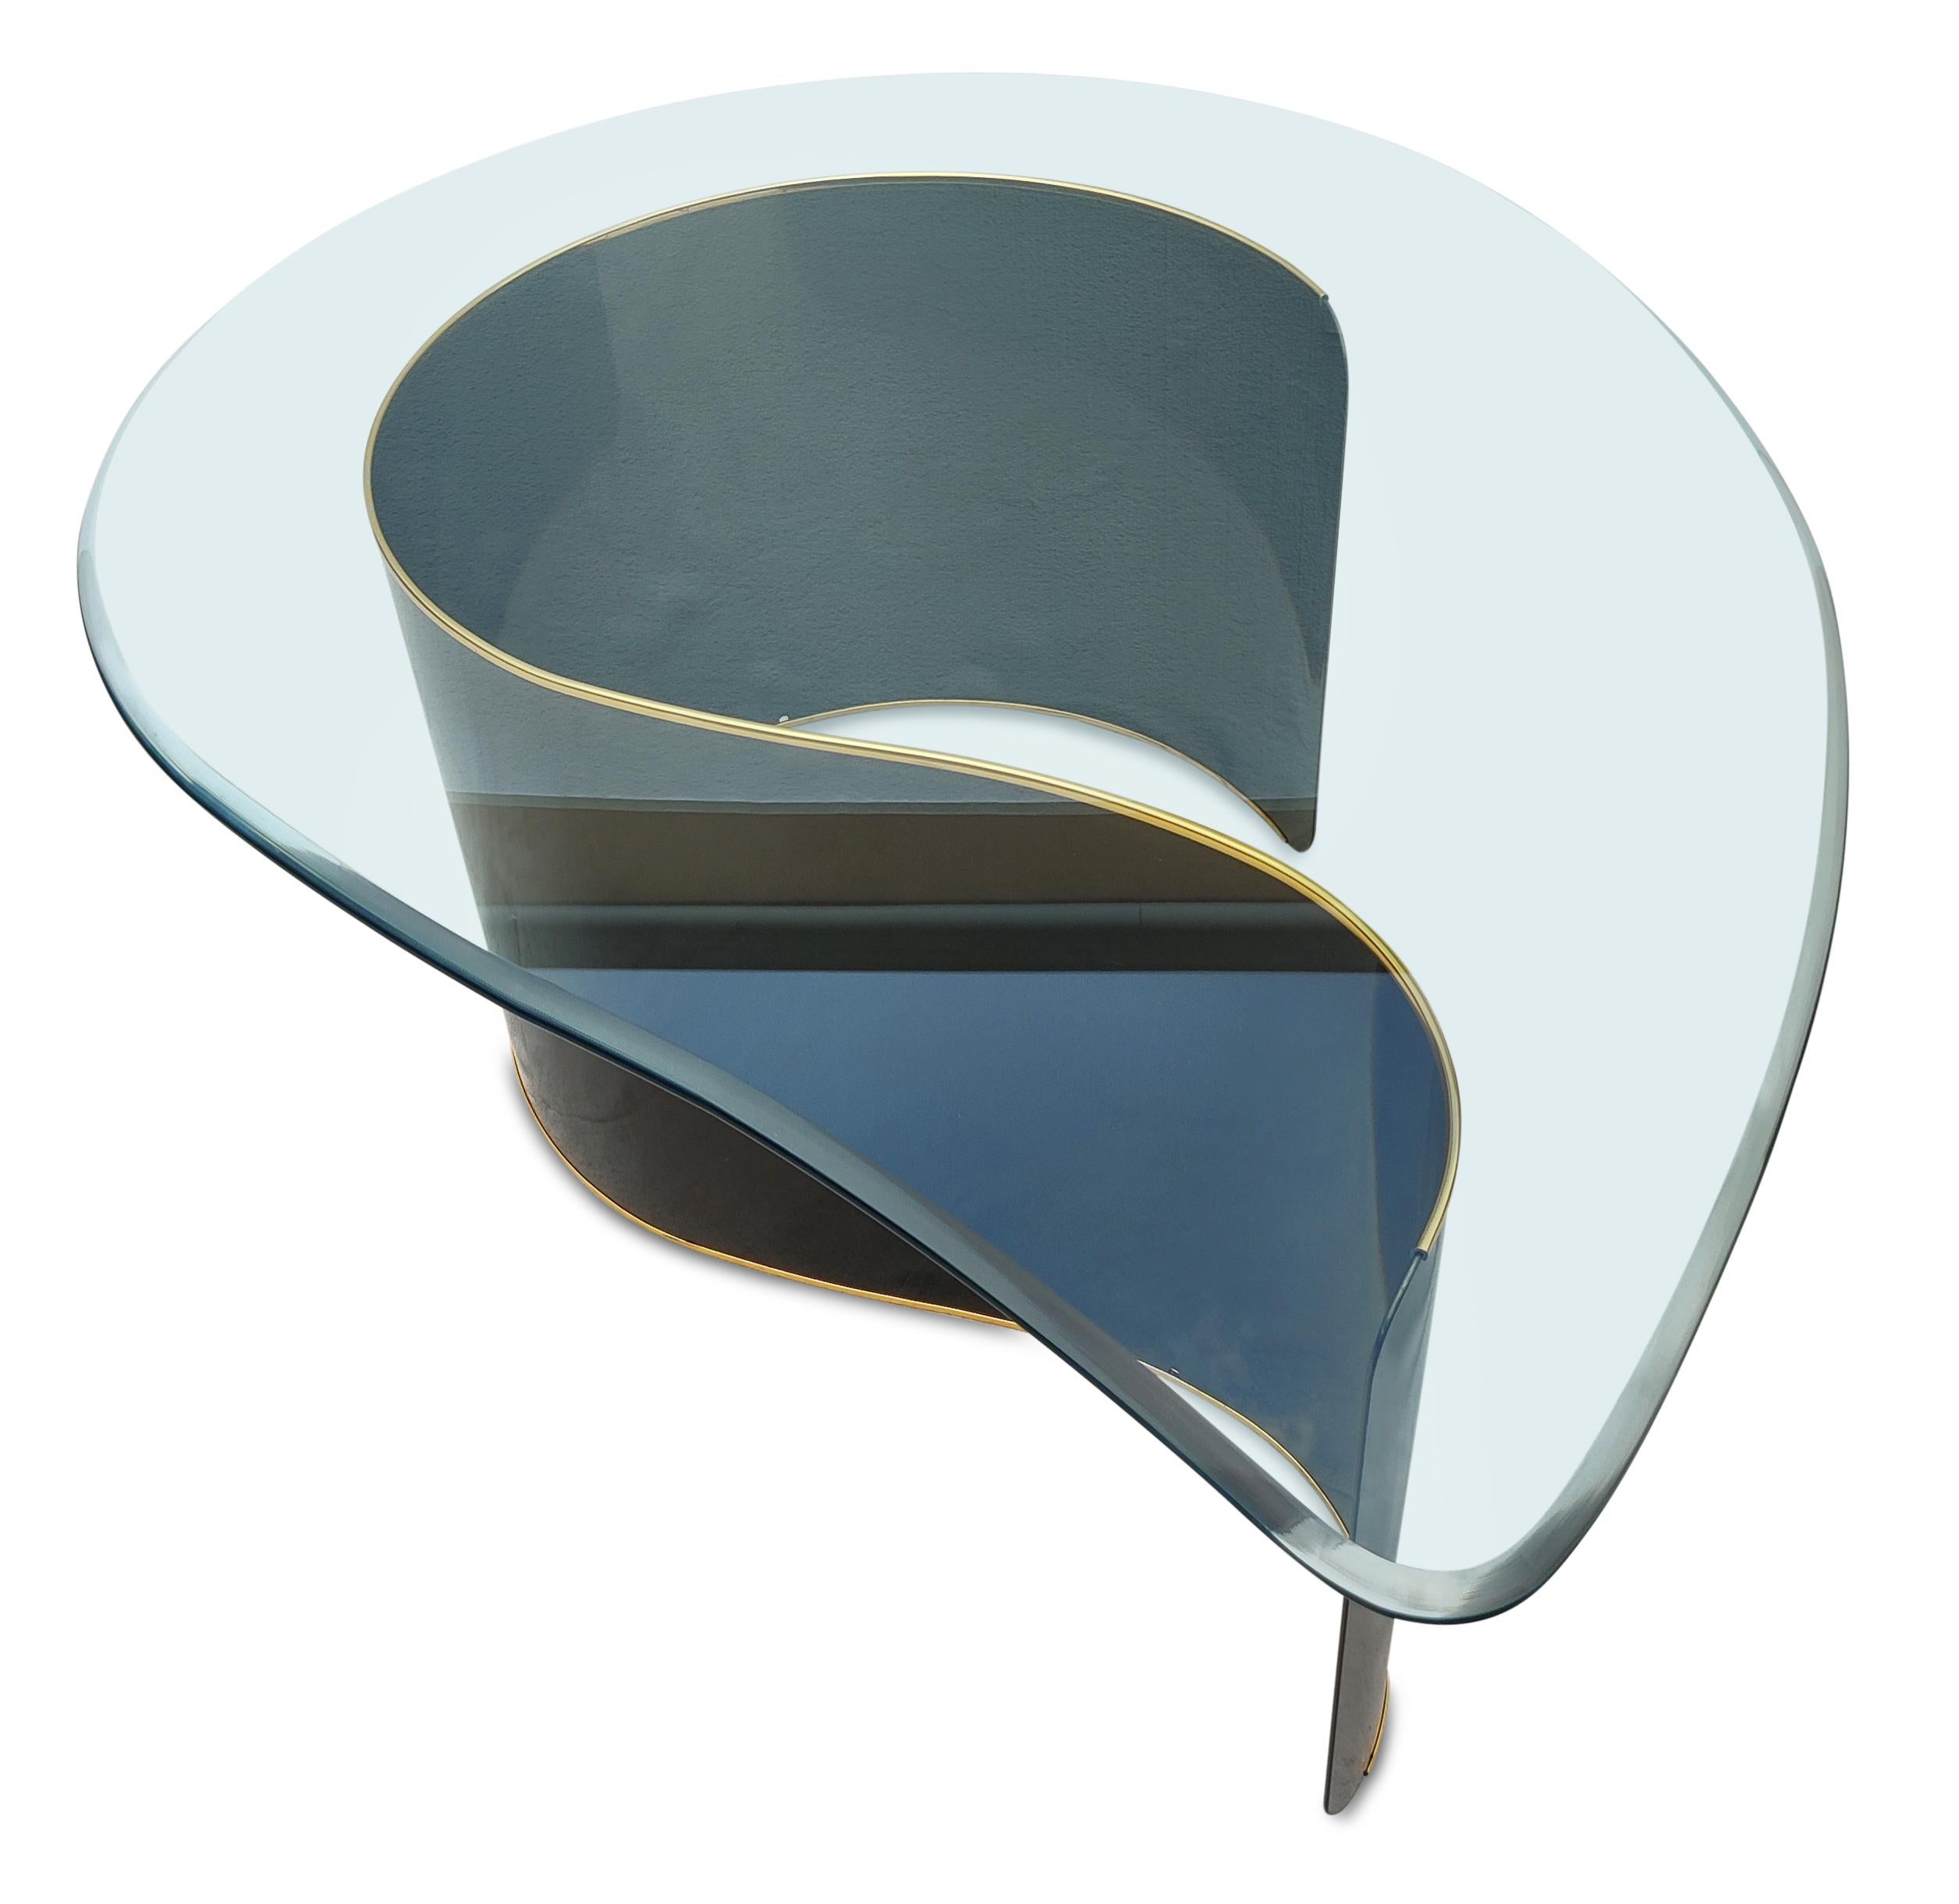 Kaizo Oto for DIA Bronze Powdercoated Curved Steel Teardrop Glass Post-Modern In Good Condition For Sale In Philadelphia, PA